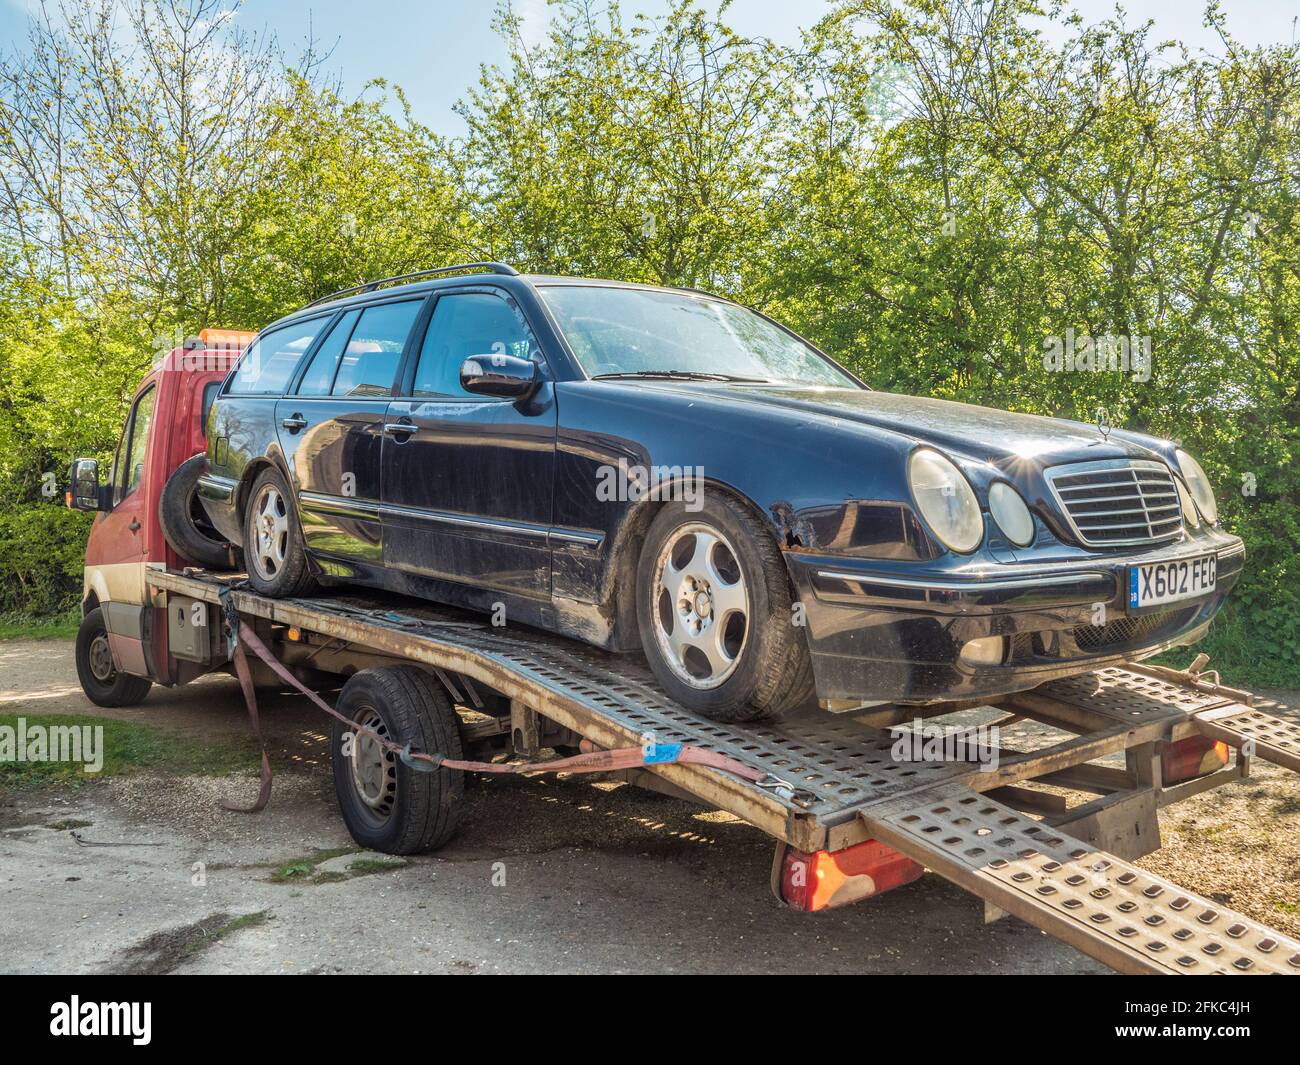 An old Mercedes estate car on a low loader / flatbed truck / recovery vehicle, ready to be taken away. Stock Photo